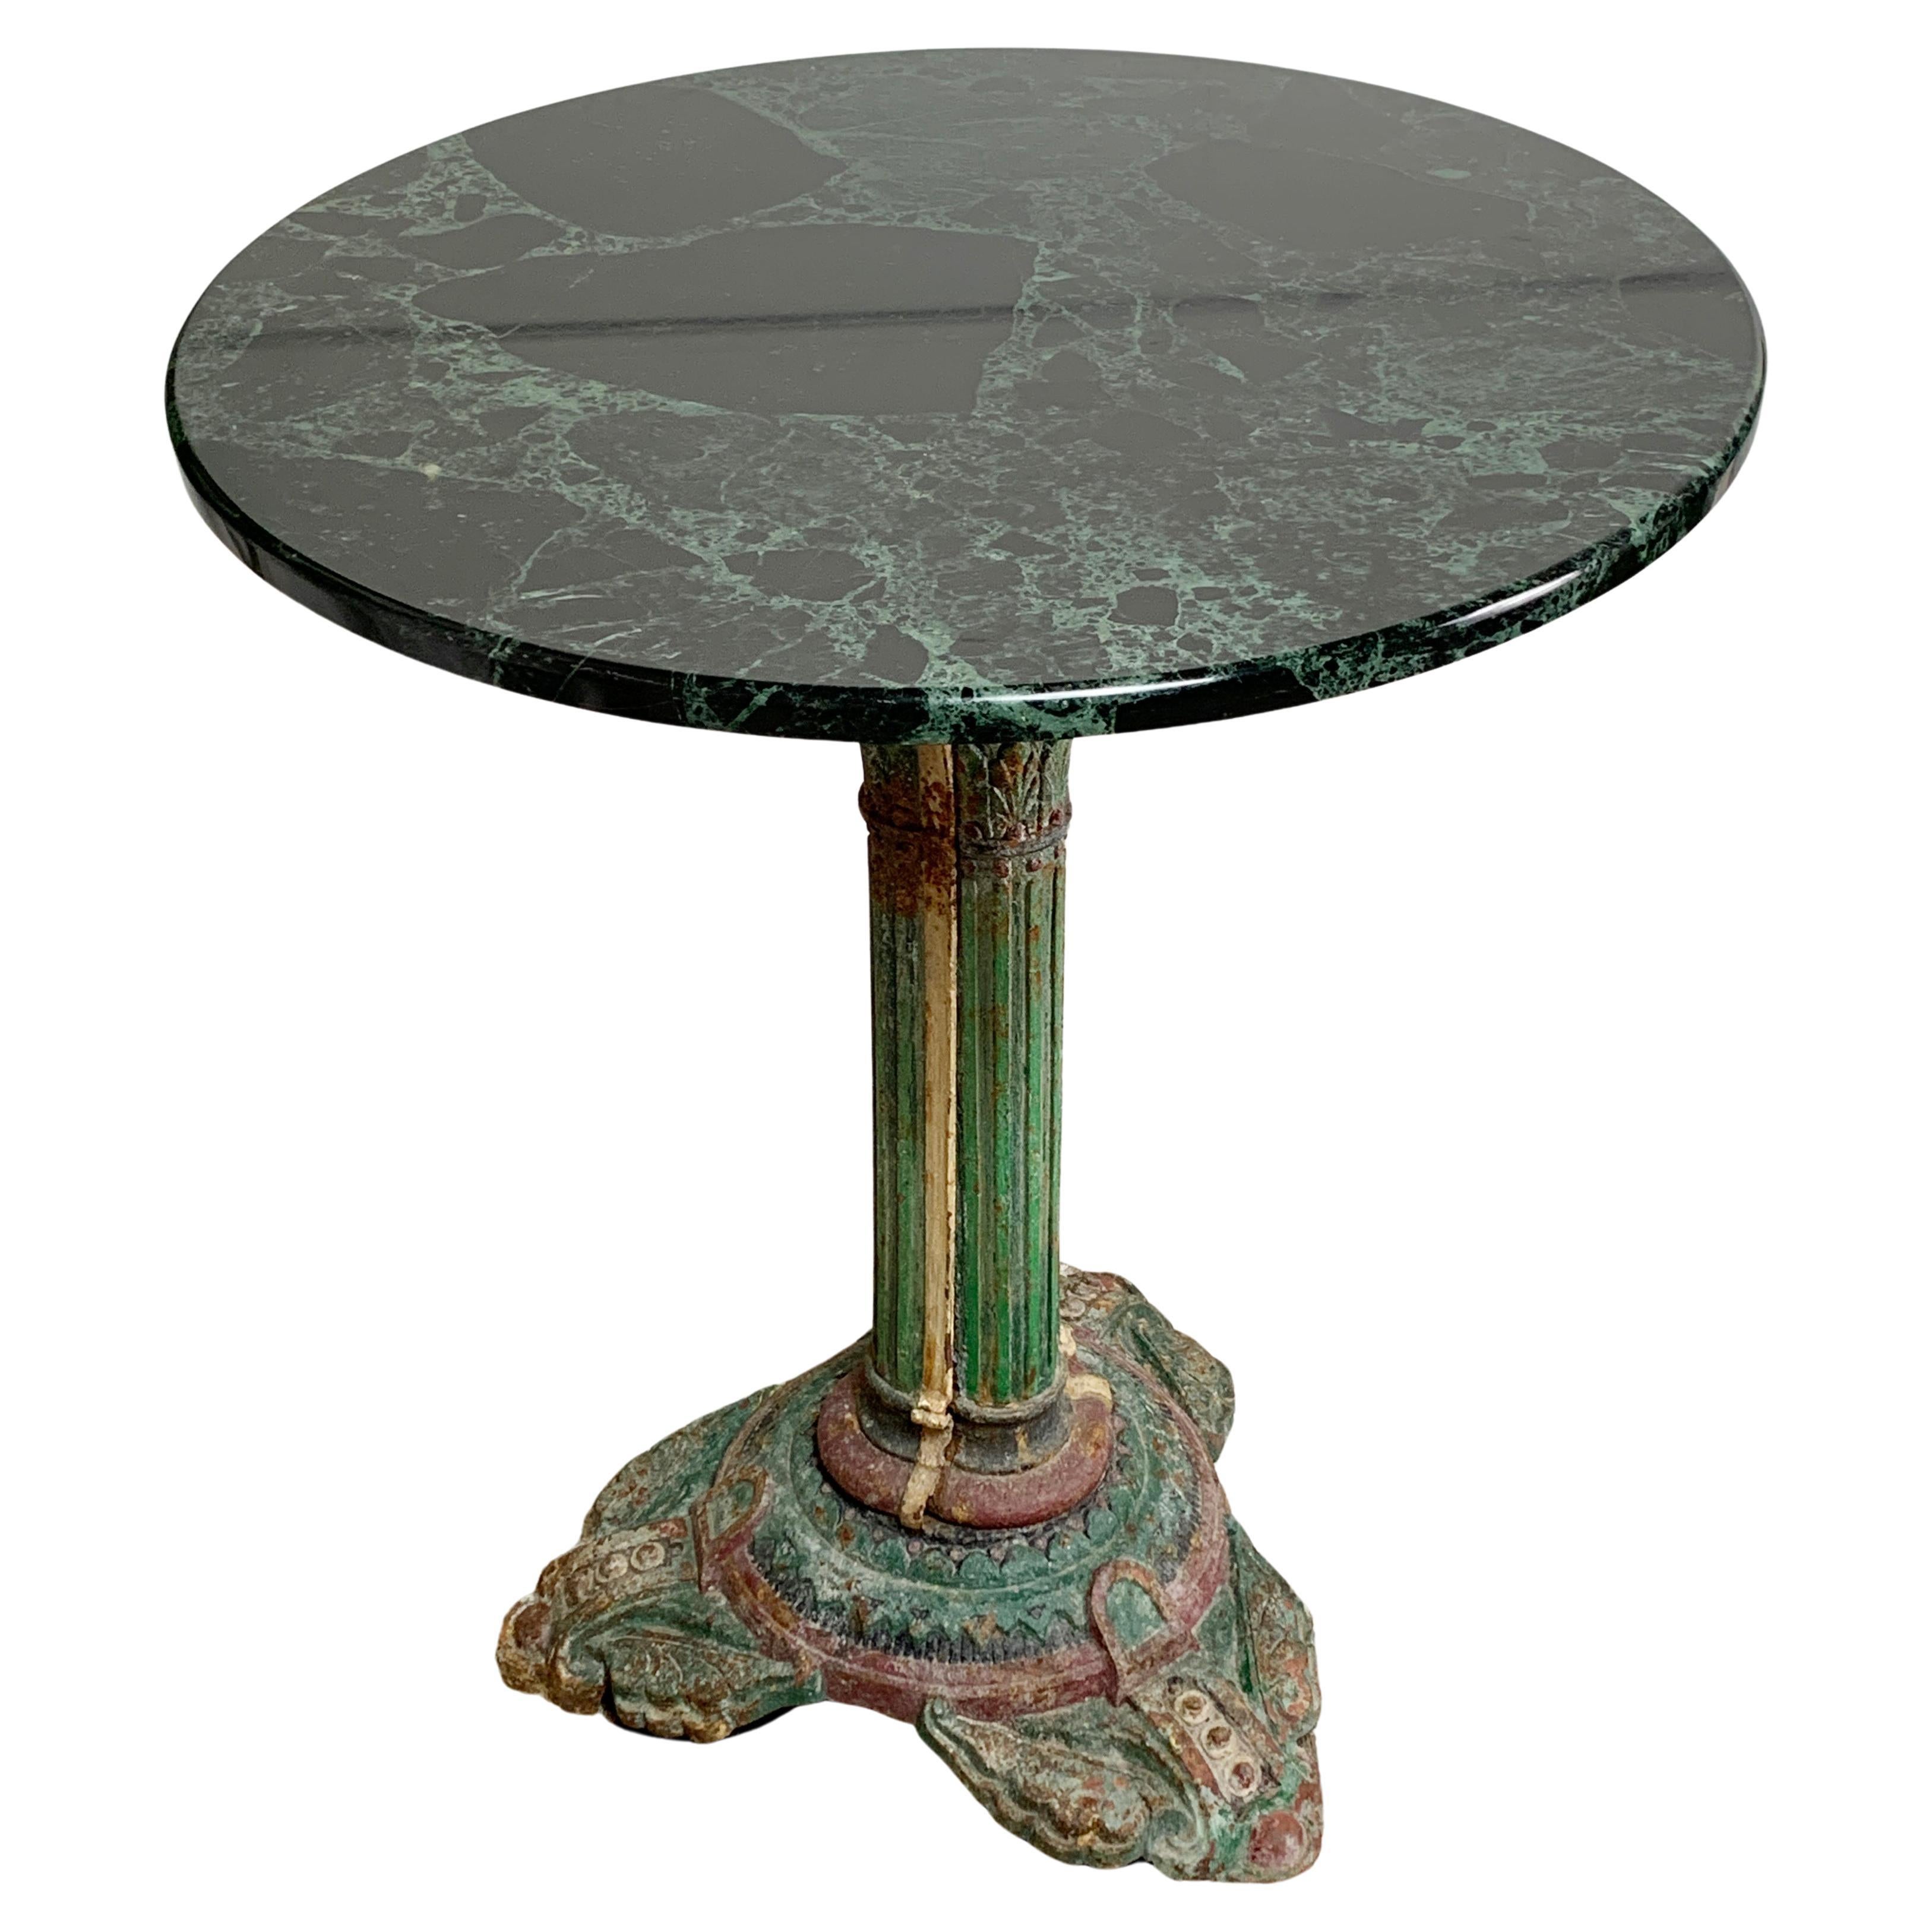 Victorian Cast Iron Painted Table with Italian Marble Top